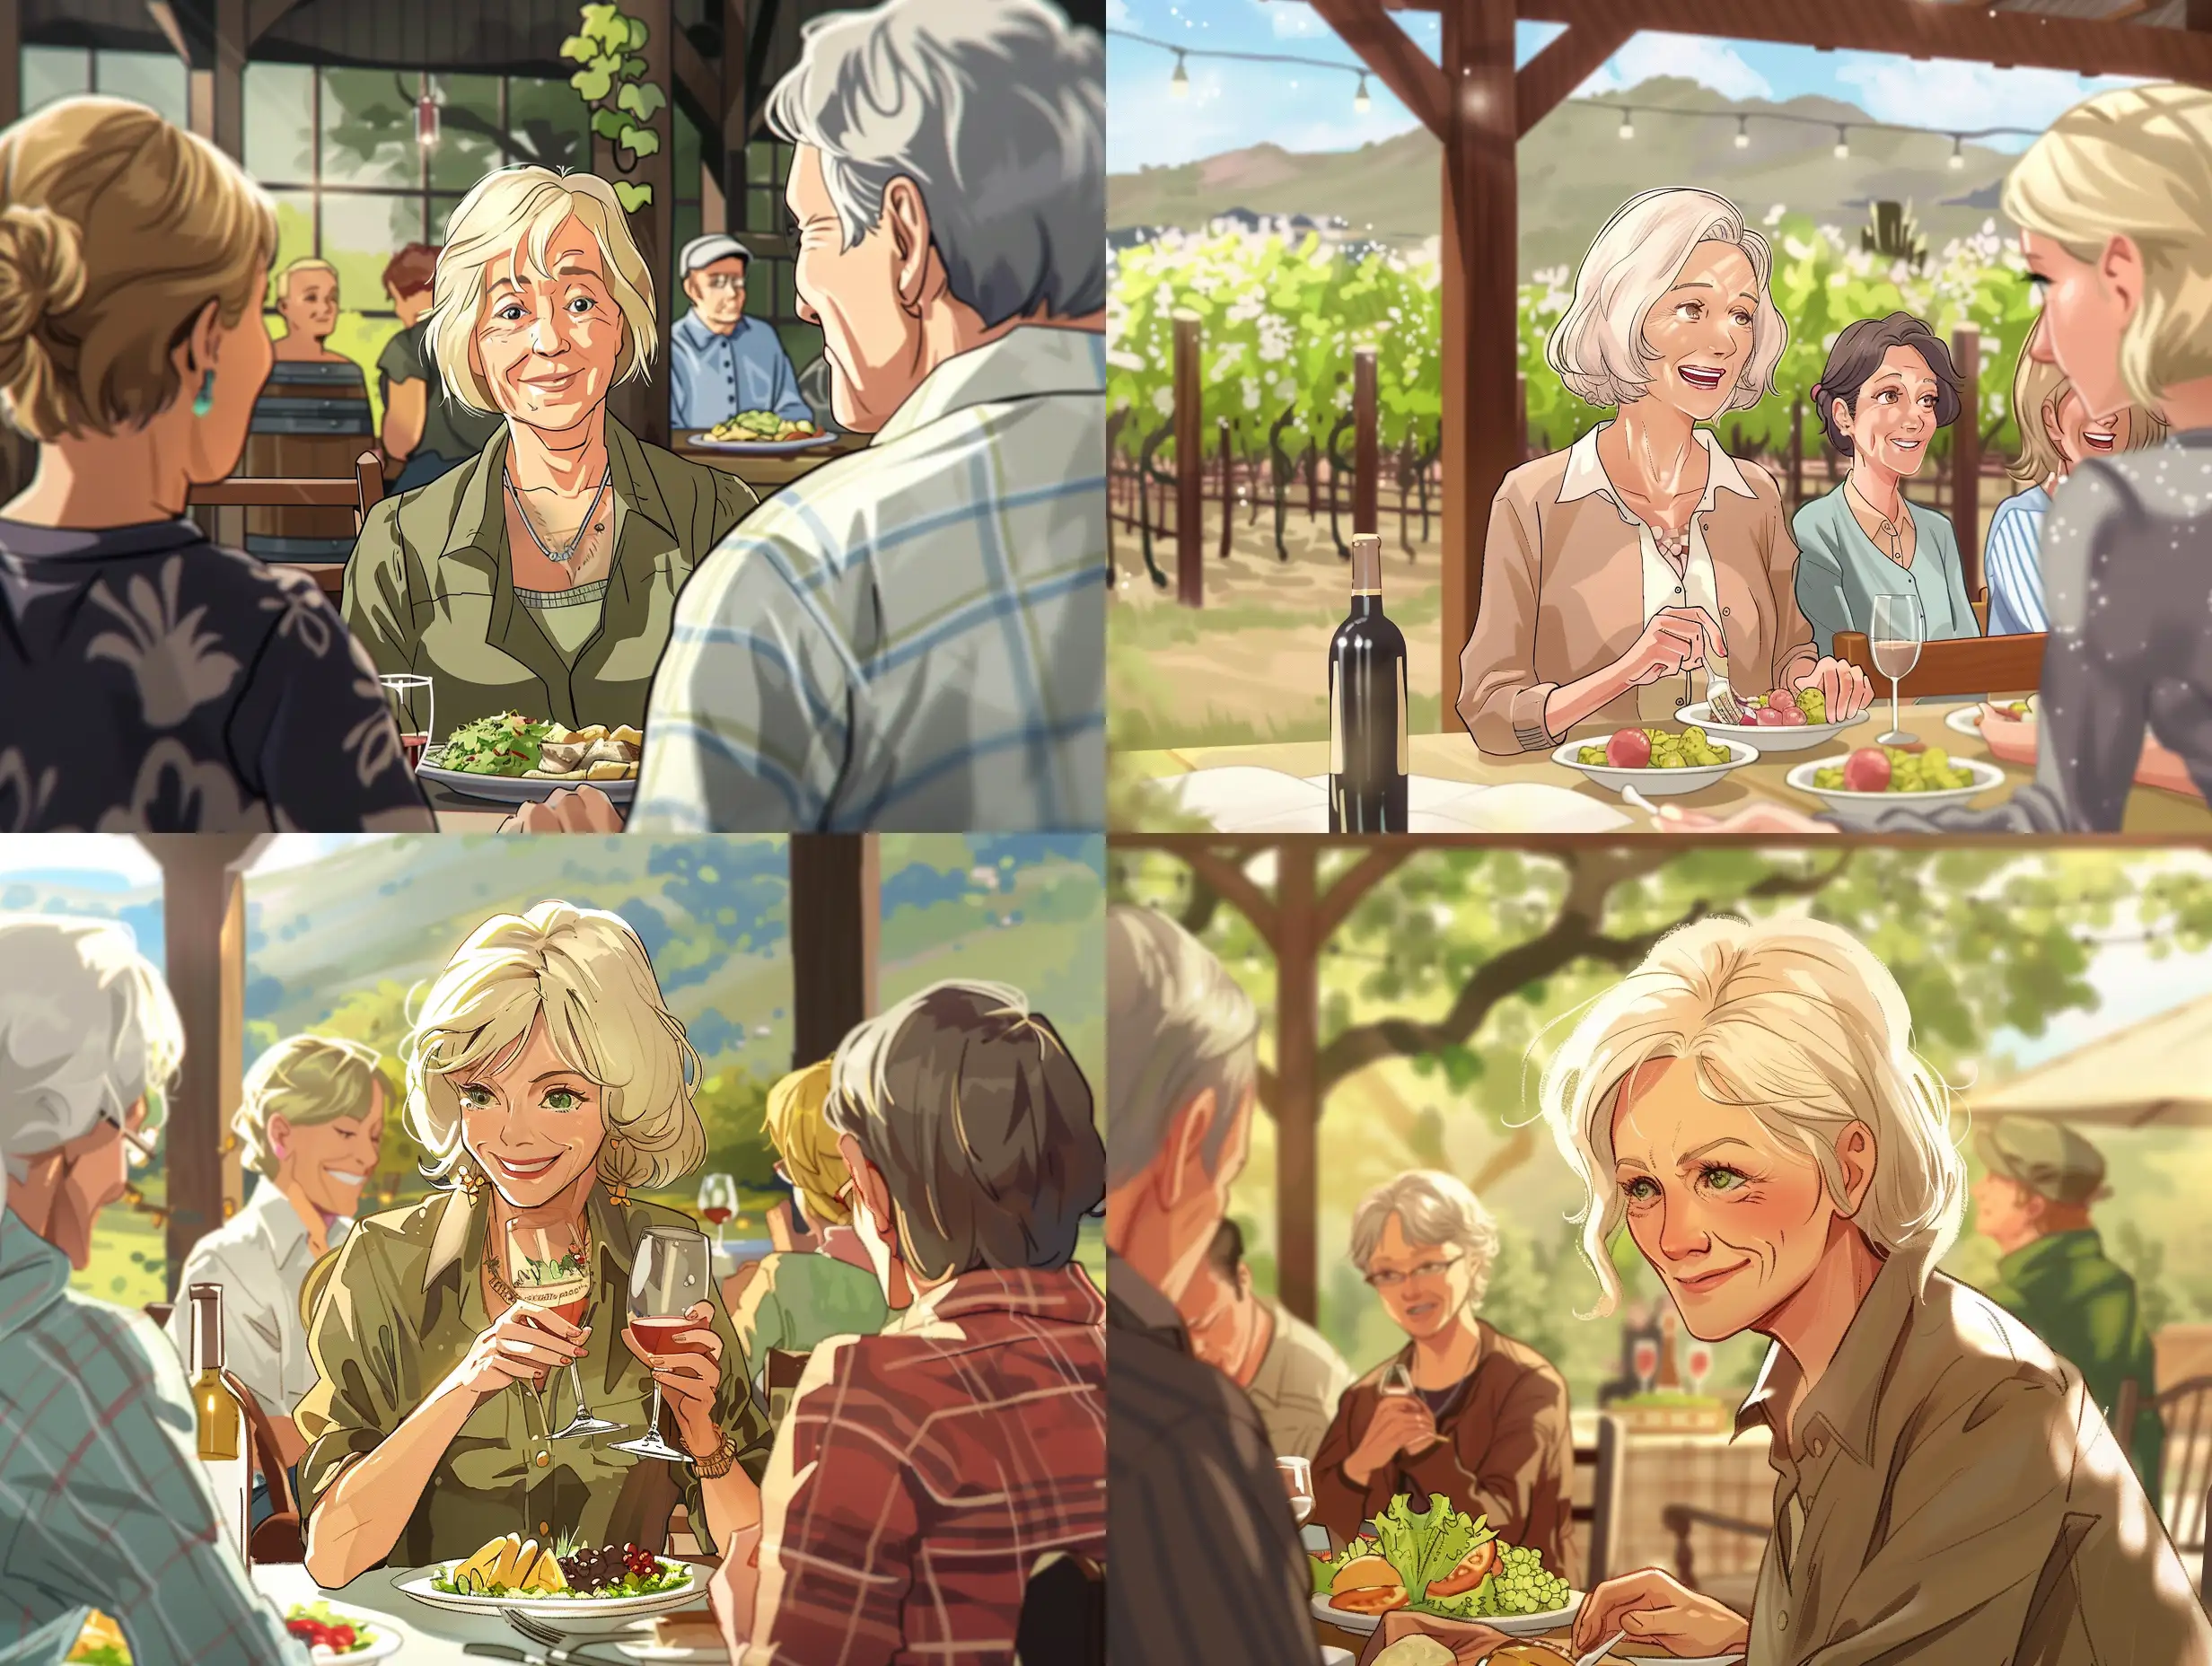 Elderly-Woman-Enjoying-Spring-Luncheon-with-Church-Group-at-Winery-Anime-Style